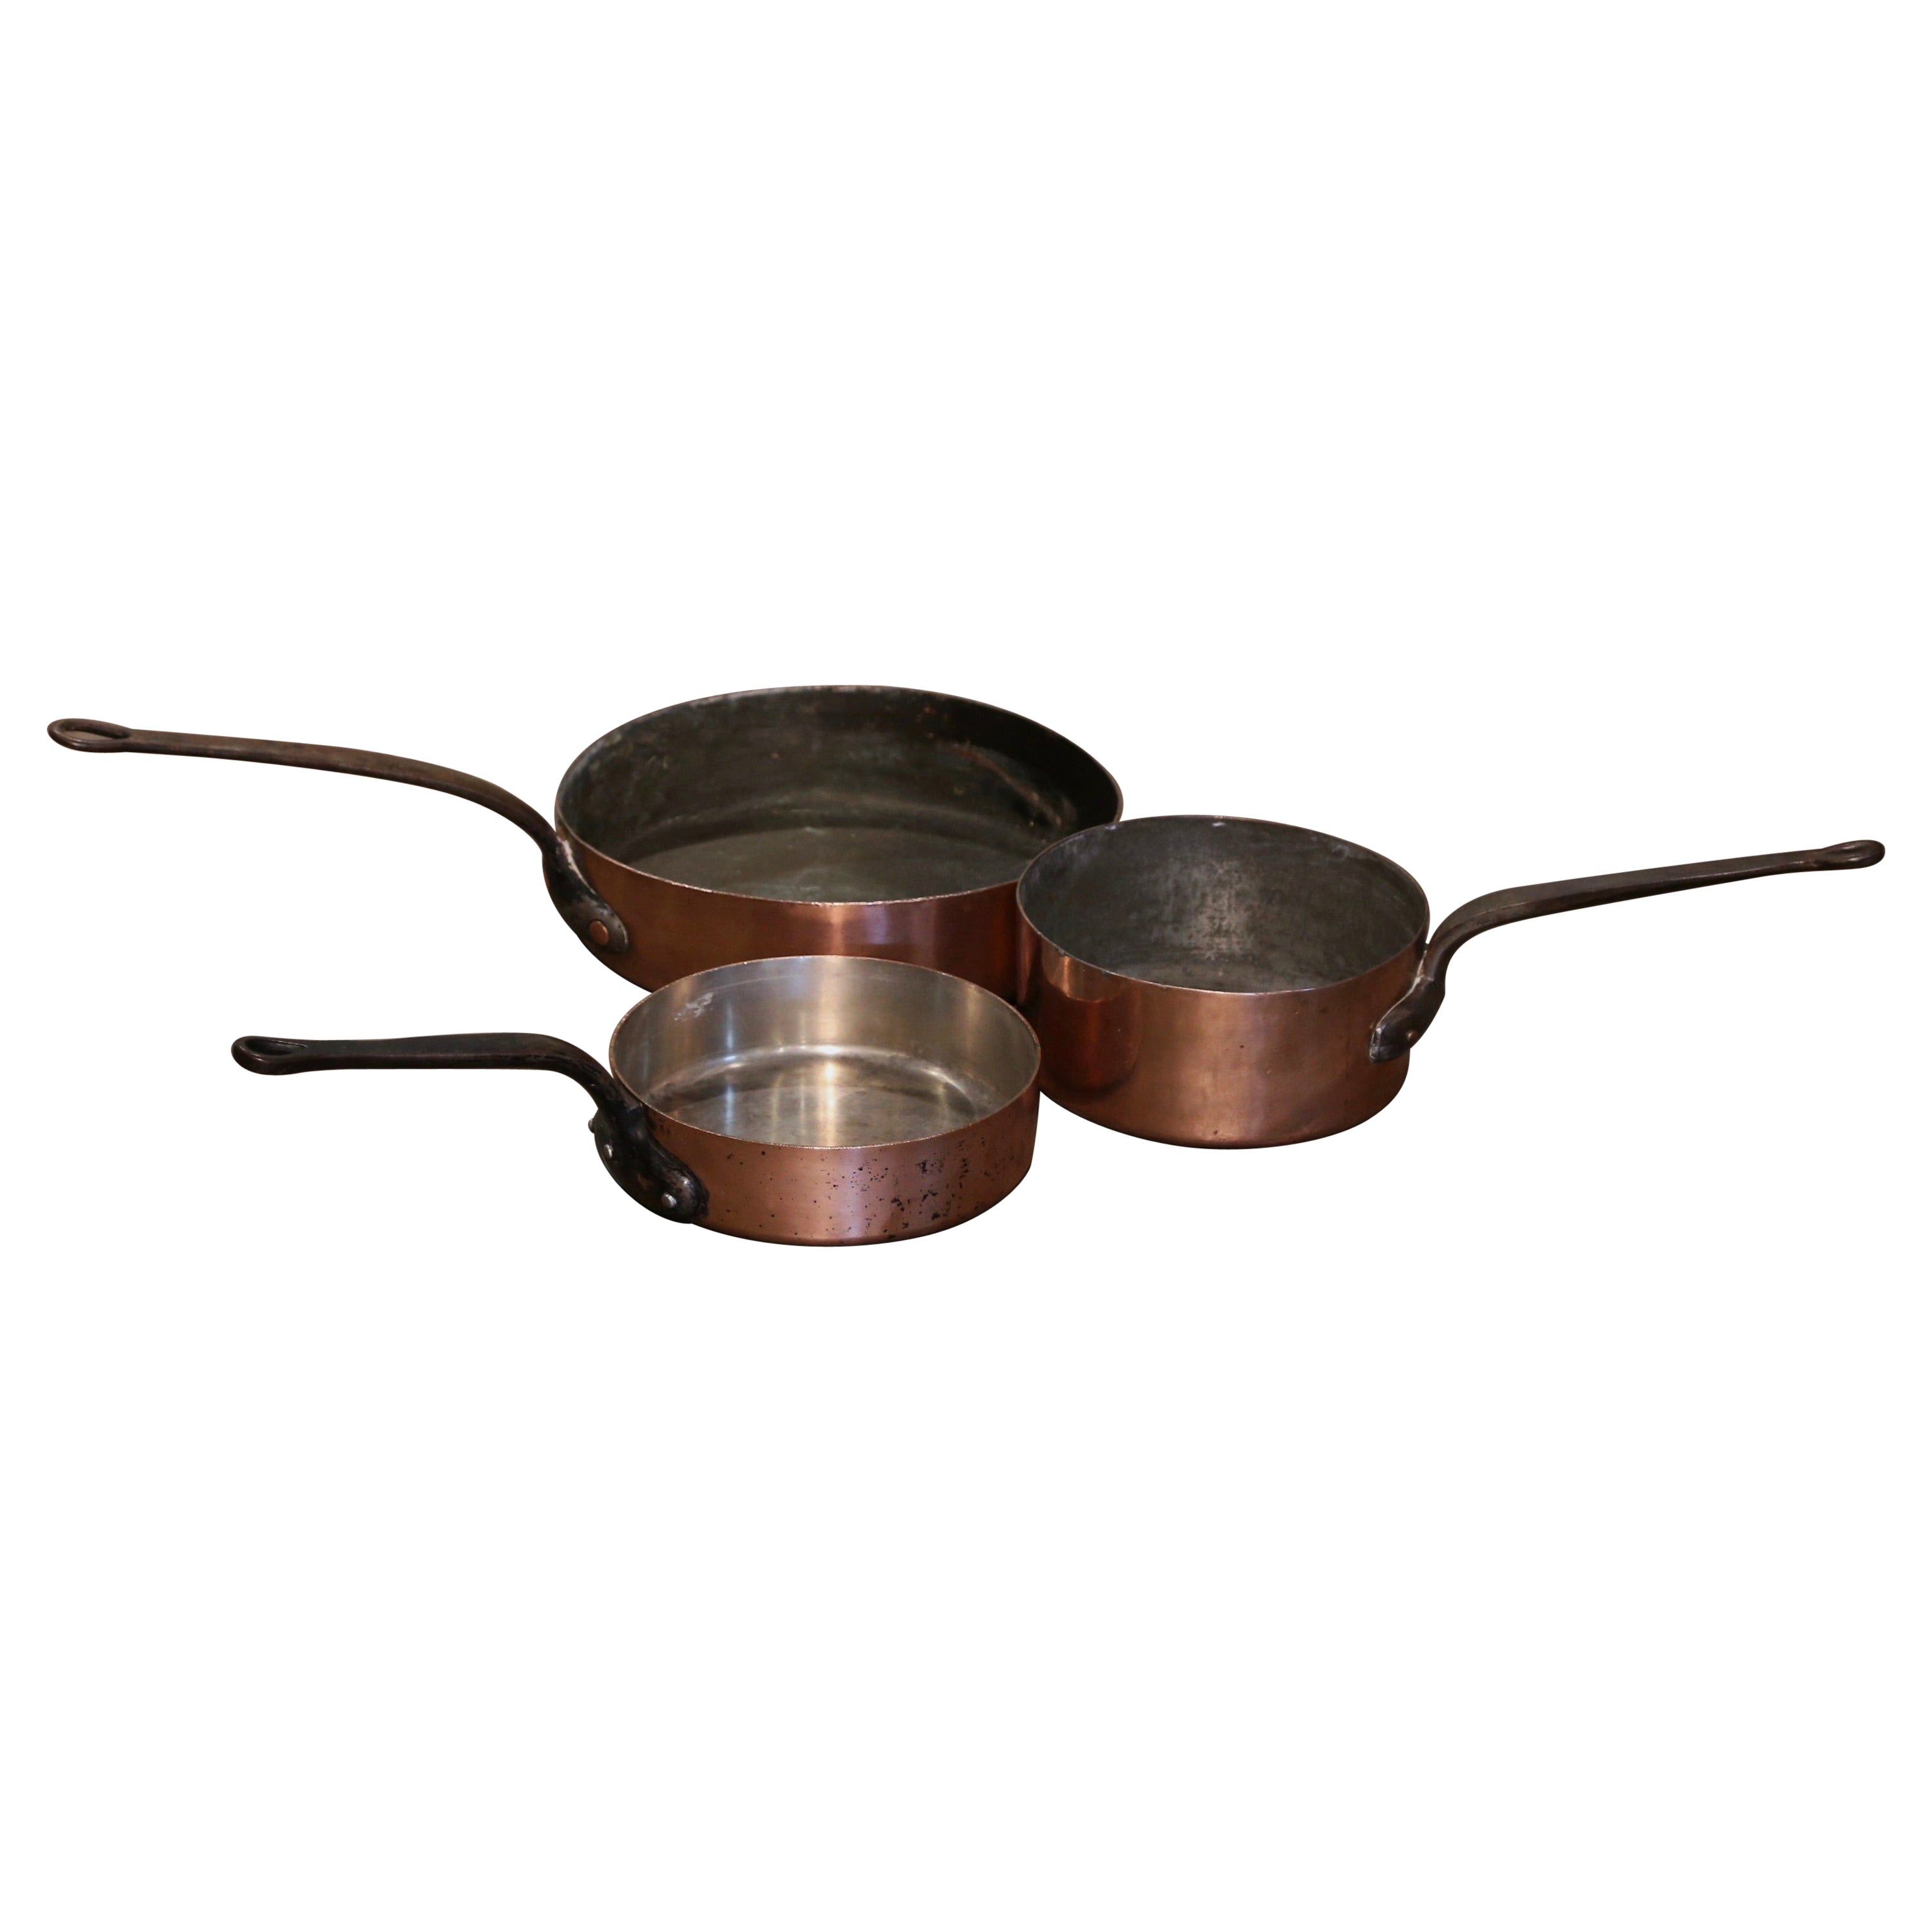 19th Century French Polished Copper and Wrought Iron Cooking Pans, Set of 3 For Sale